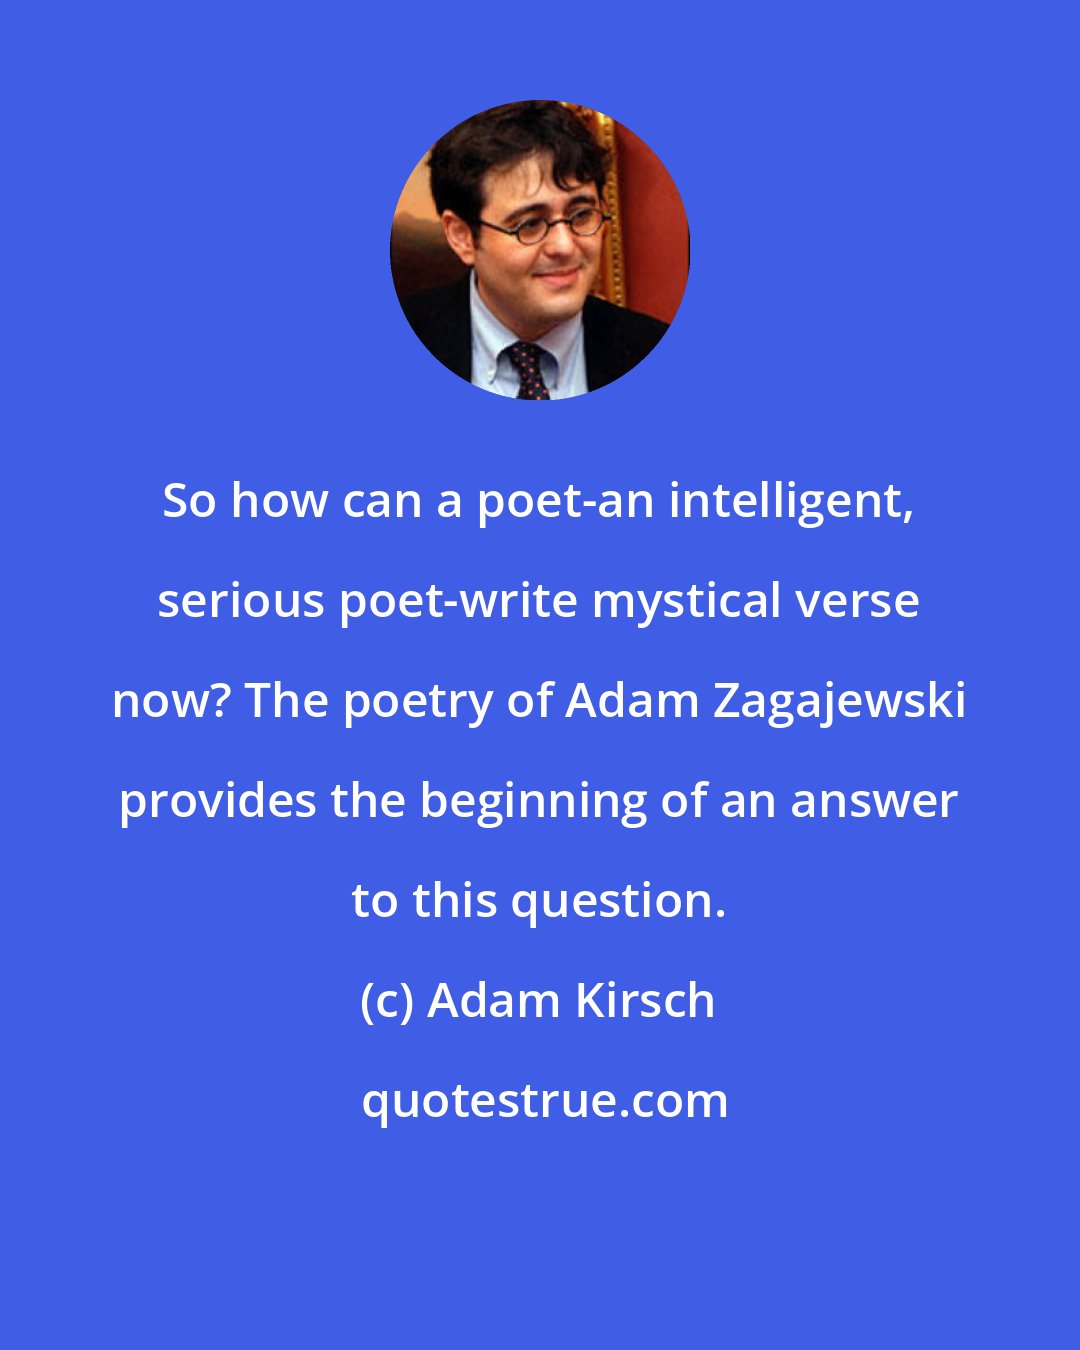 Adam Kirsch: So how can a poet-an intelligent, serious poet-write mystical verse now? The poetry of Adam Zagajewski provides the beginning of an answer to this question.